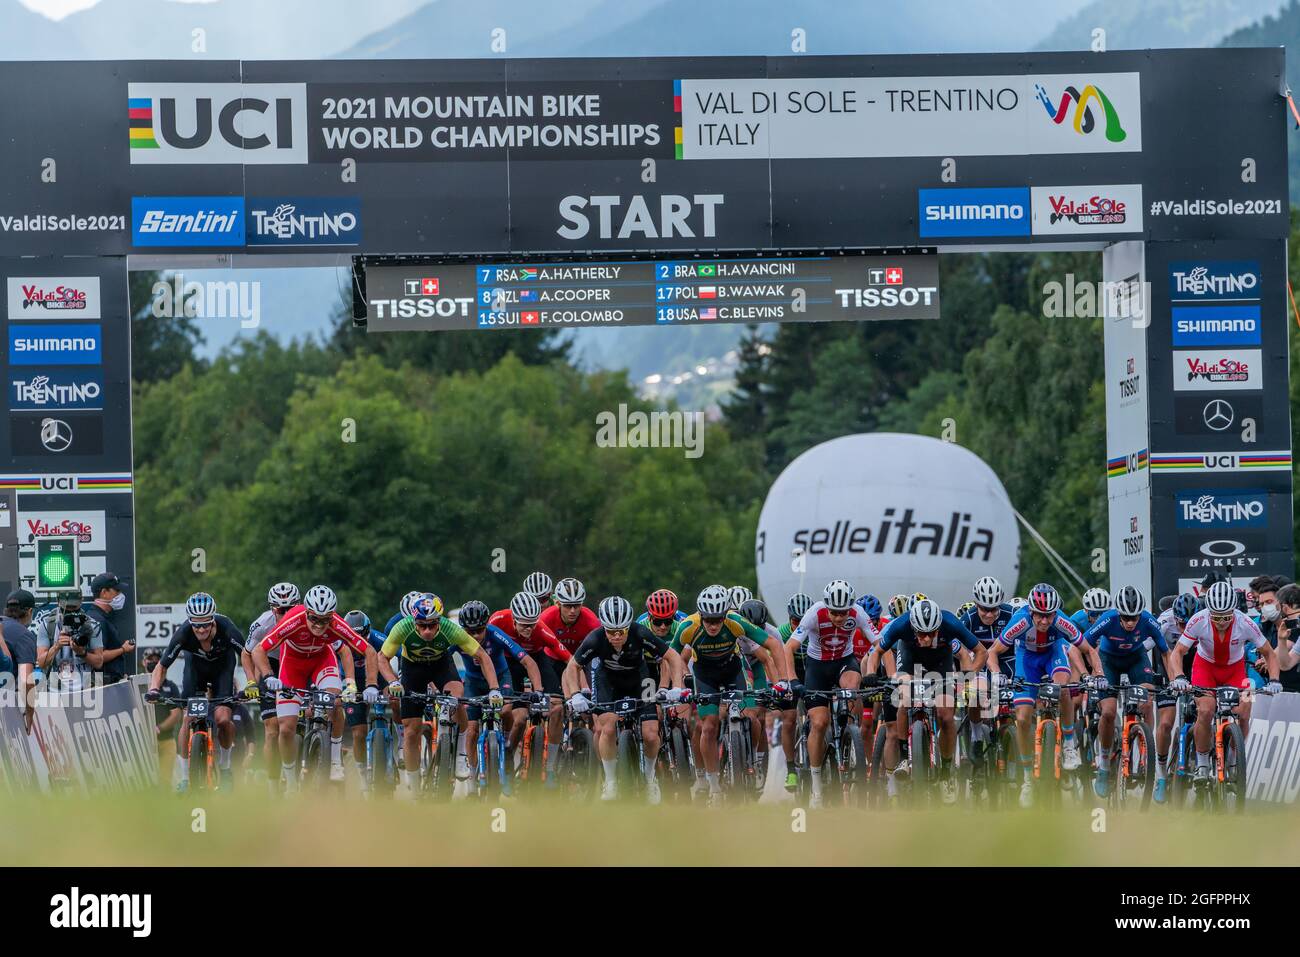 Start during the Cross Country Short Track XCC at the 2021 MTB World Championships, Mountain Bike cycling event on August 26, 2021 in Val Di Sole, Italy - Photo Olly Bowman / DPPI Stock Photo